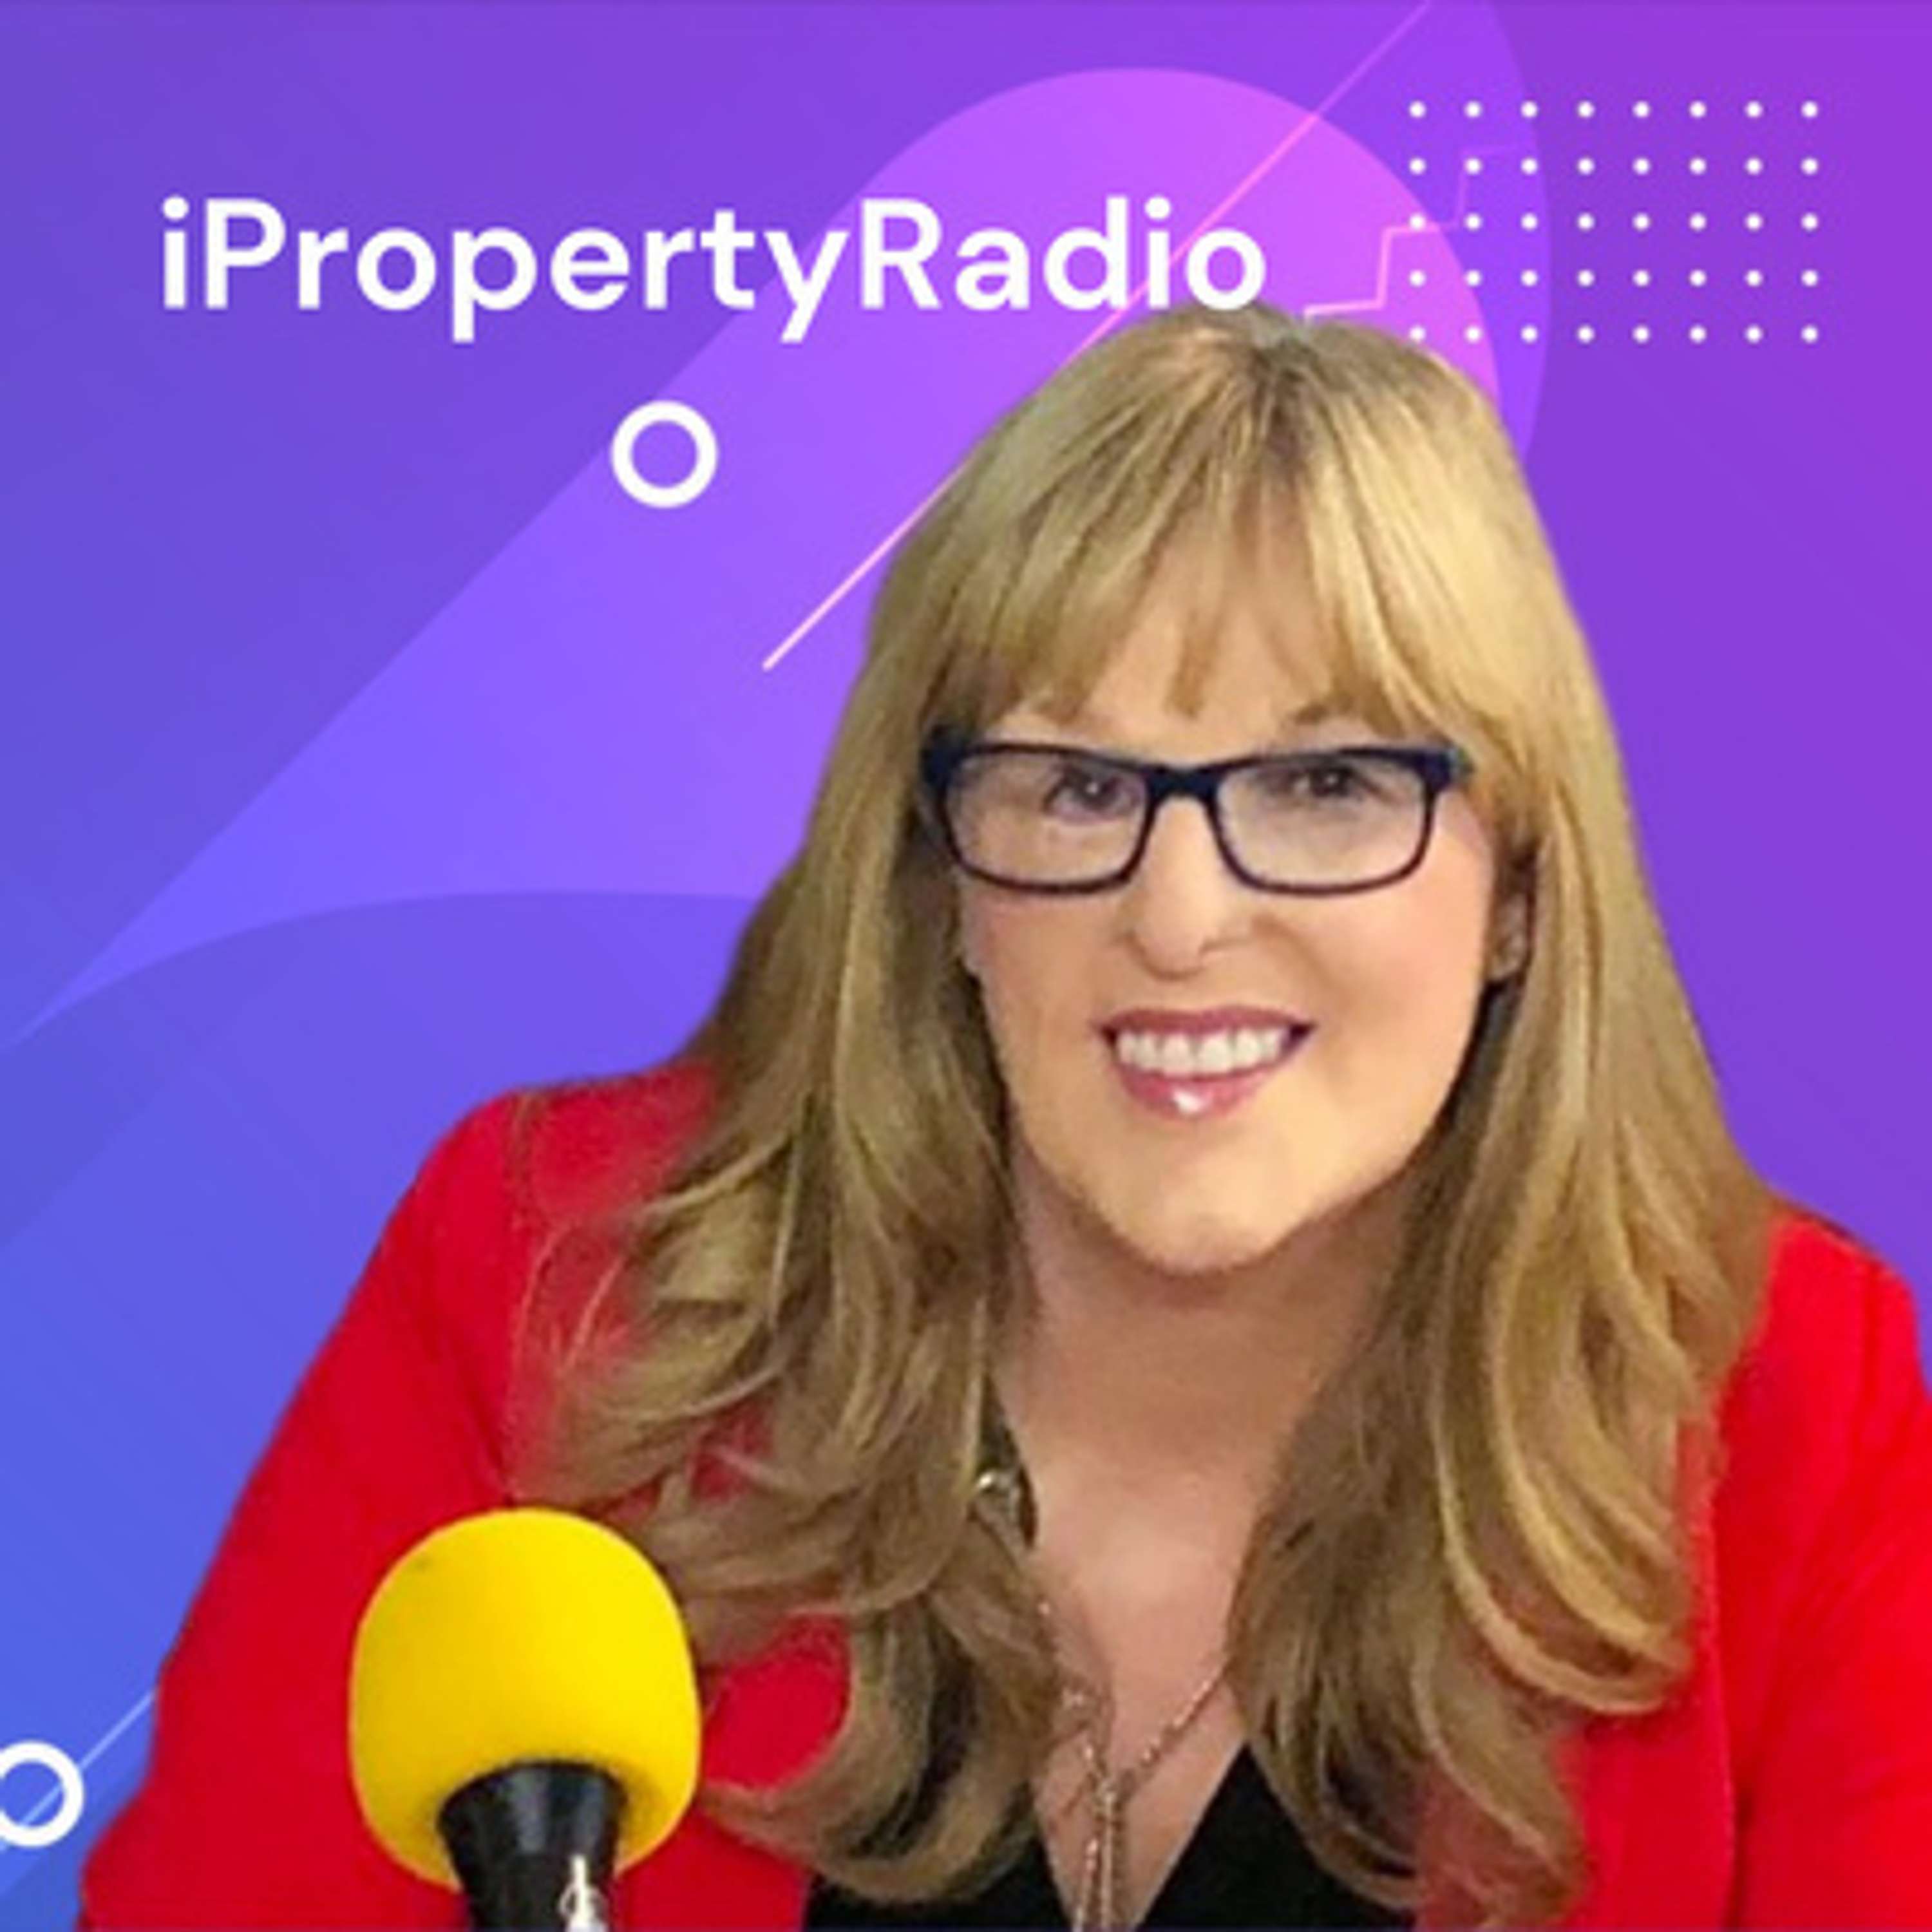 Ep.9 iPropertyRadio: Property Matters, March 19th 2019